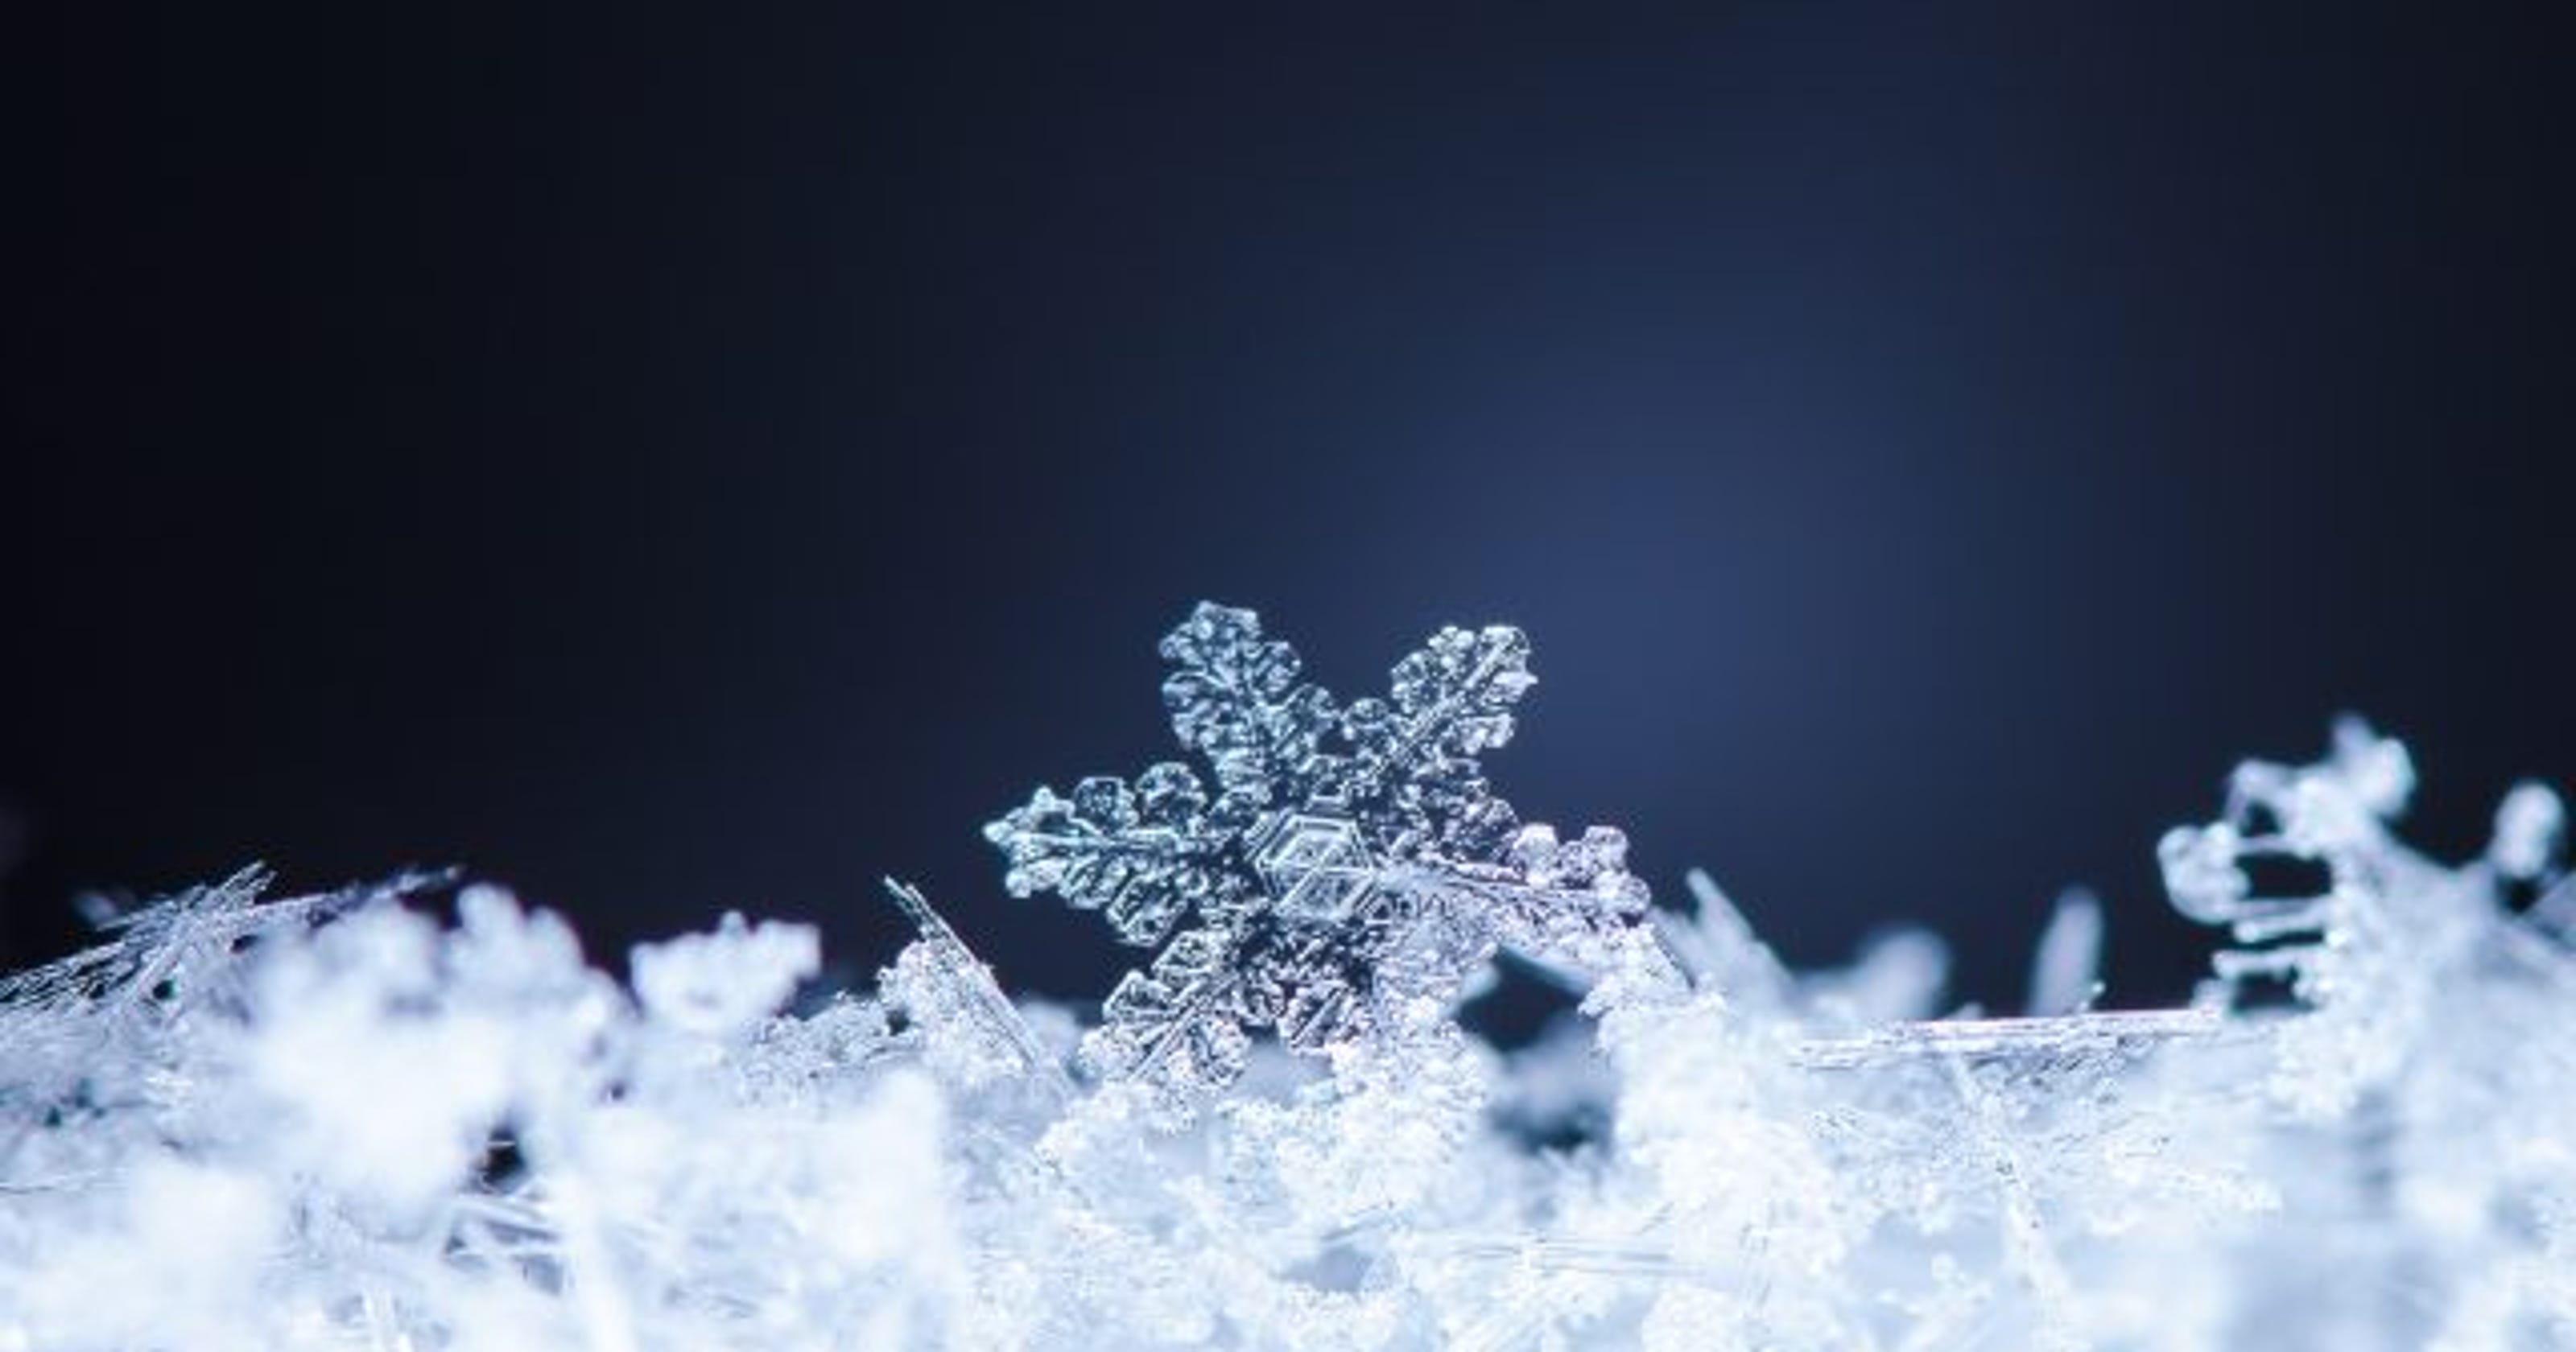 Been called a 'snowflake'? The 'it' new insult